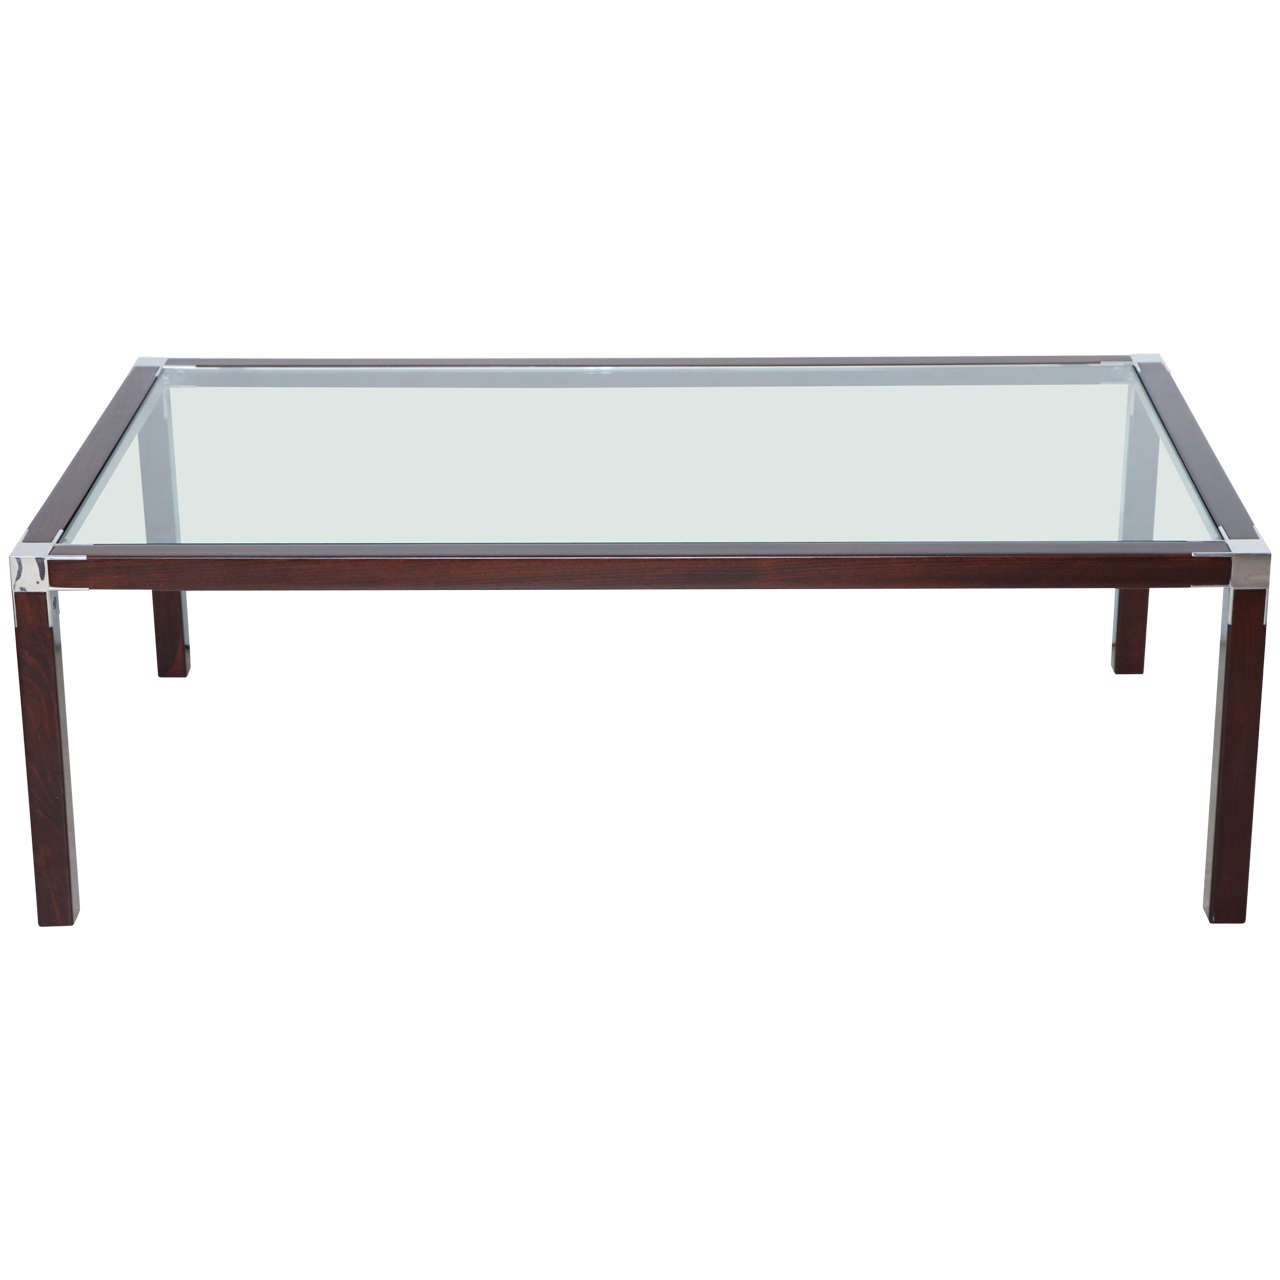 Mid-Century Modern Beech Wood and Nickel Coffee Table with Smoked Glass Top